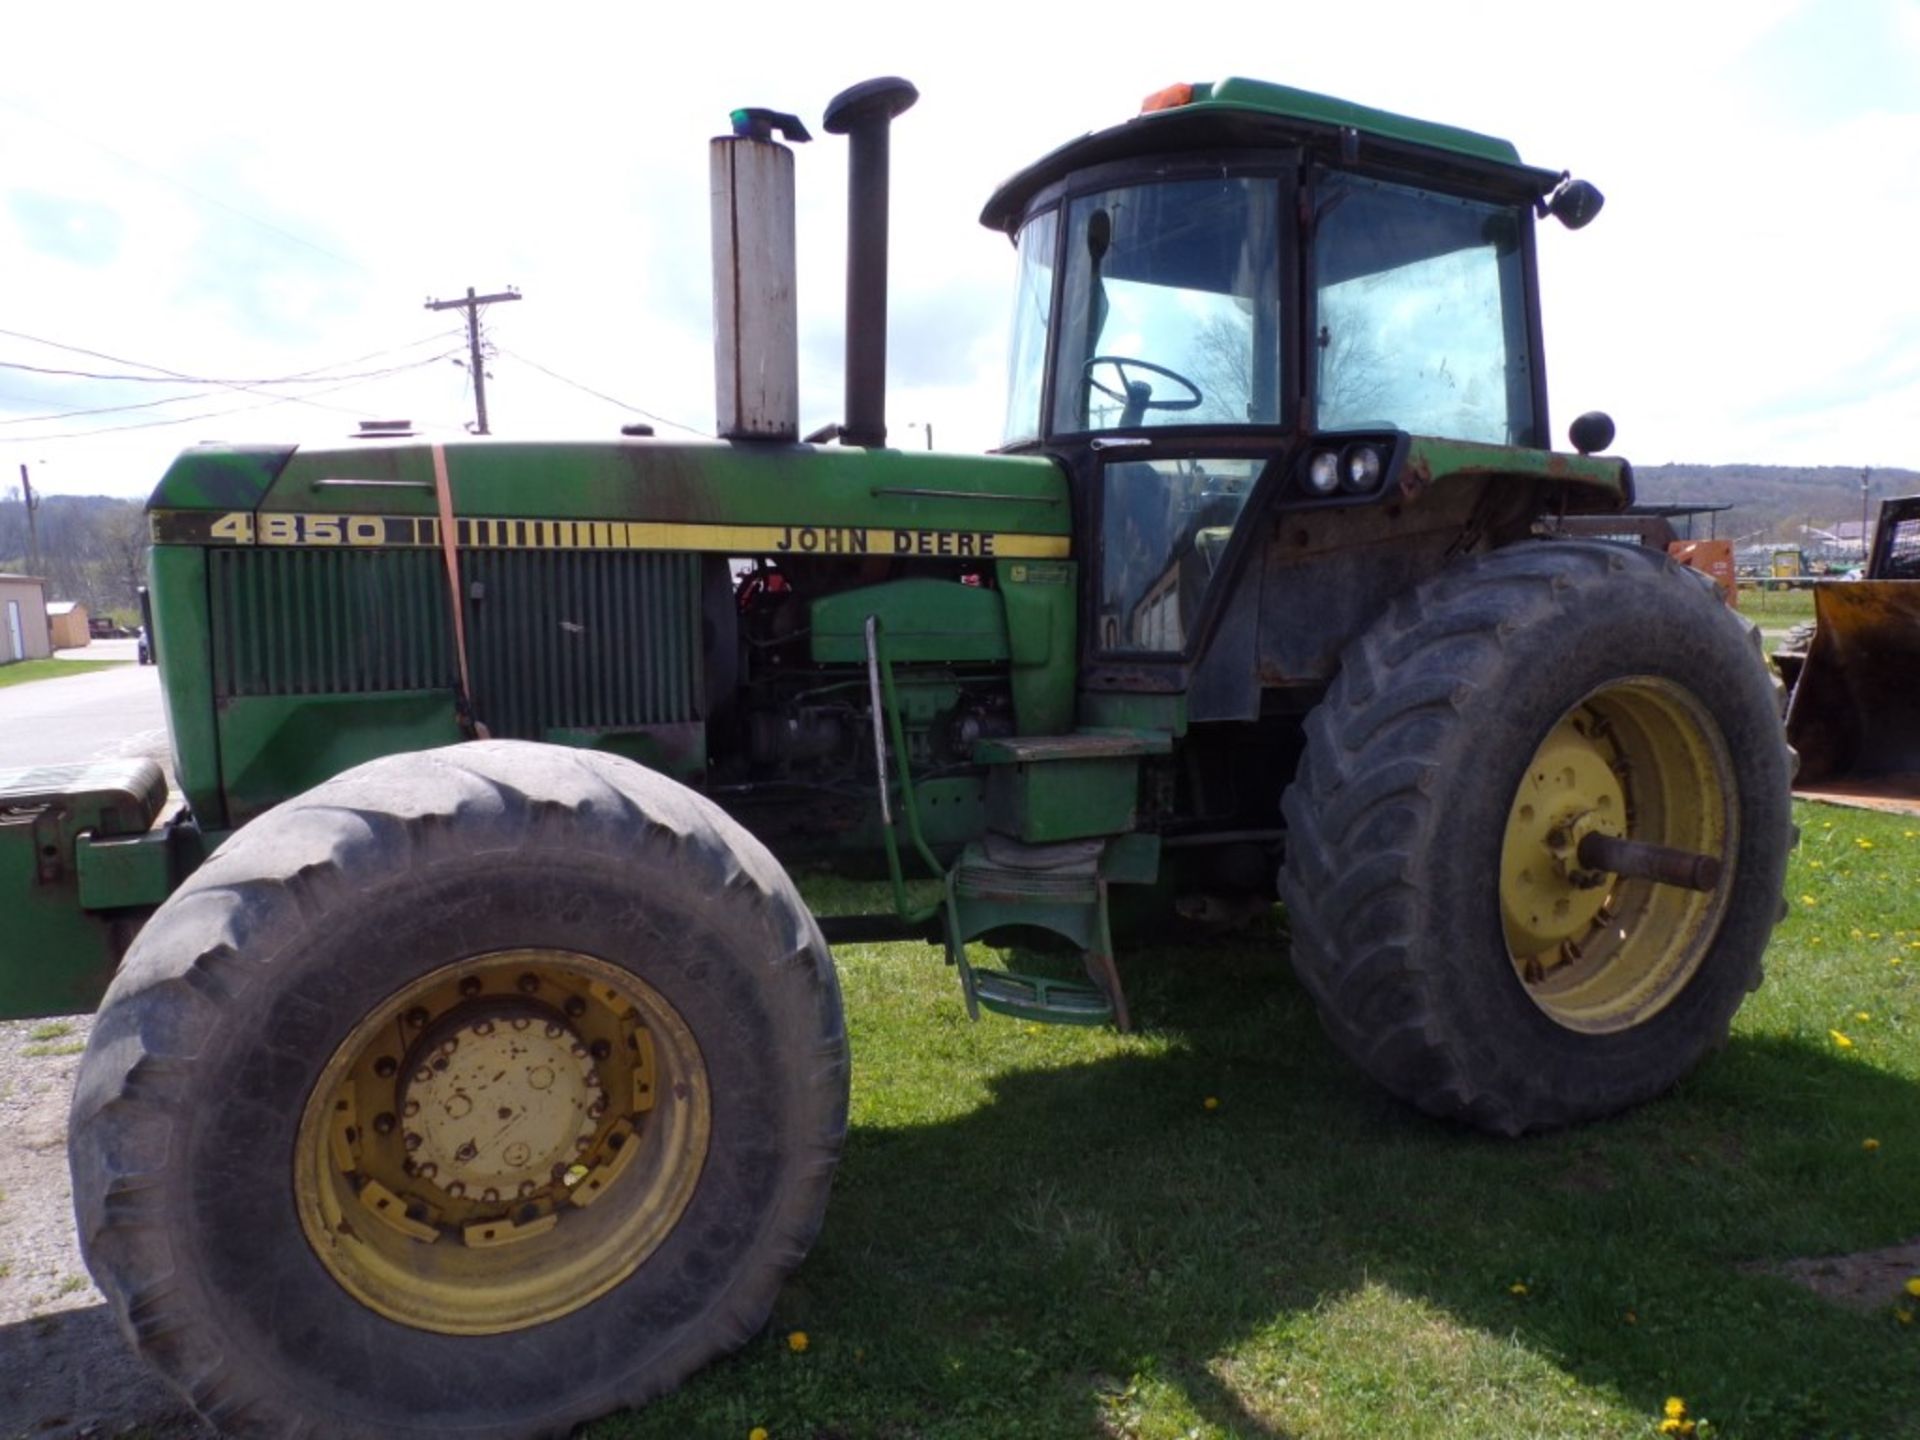 John Deere 4850 4 WD Tractor, 3 PTH, 1000 RPM, PTO, 3 Rear Hyd. Remotes, 15 Spd. Powershift, - Image 2 of 4